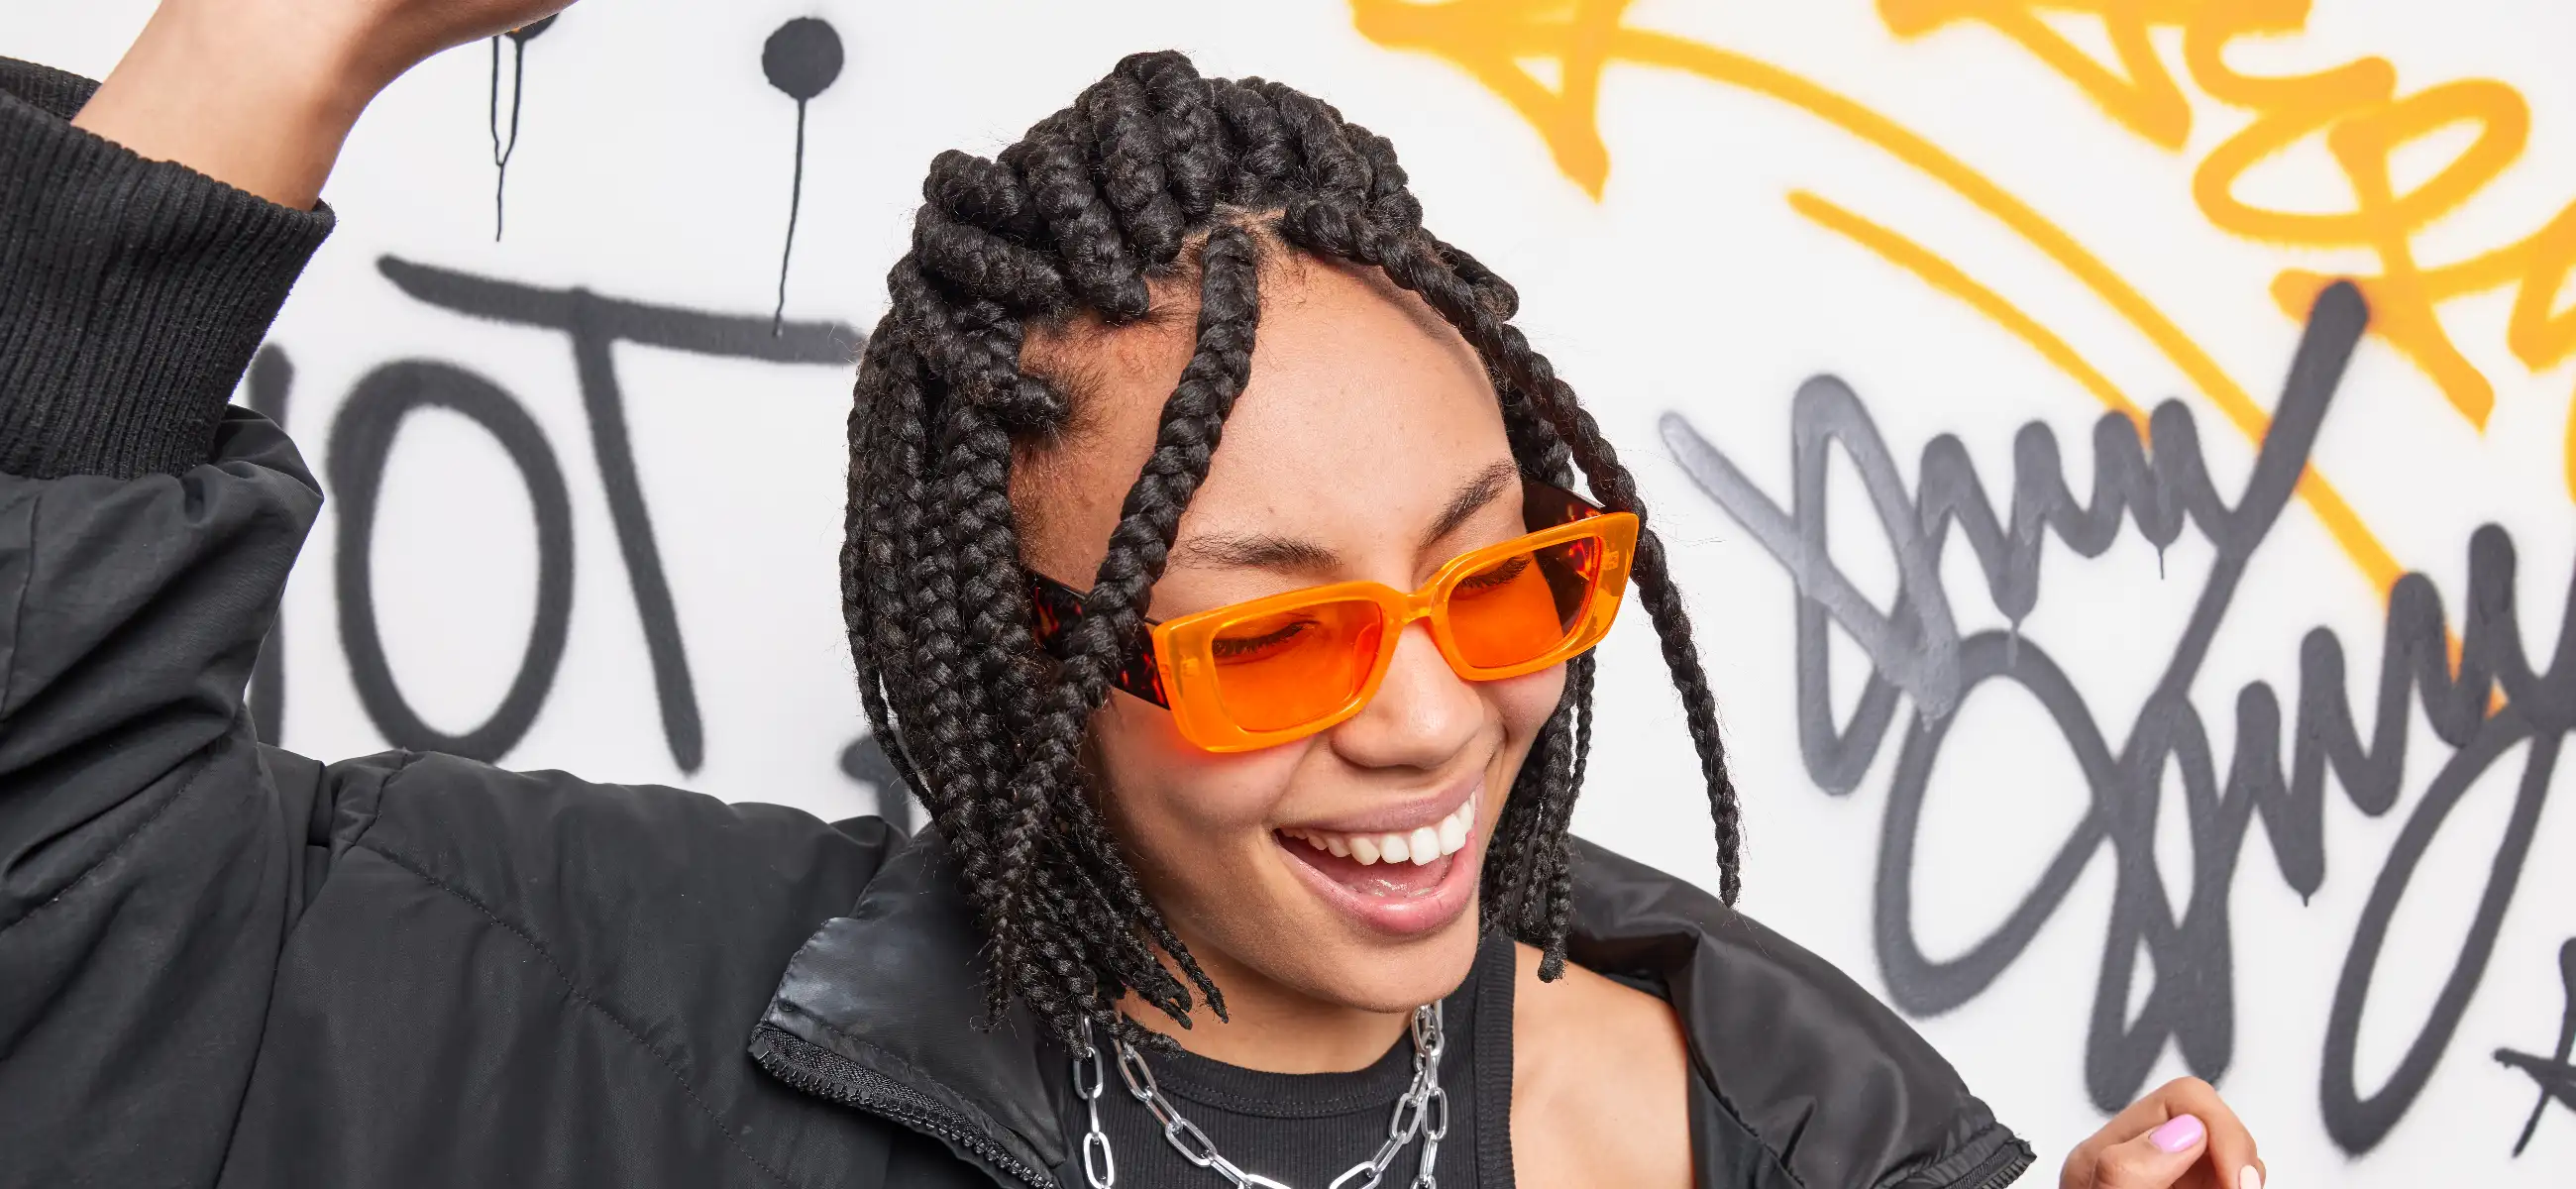 6 pop smoke braids styles to try this year